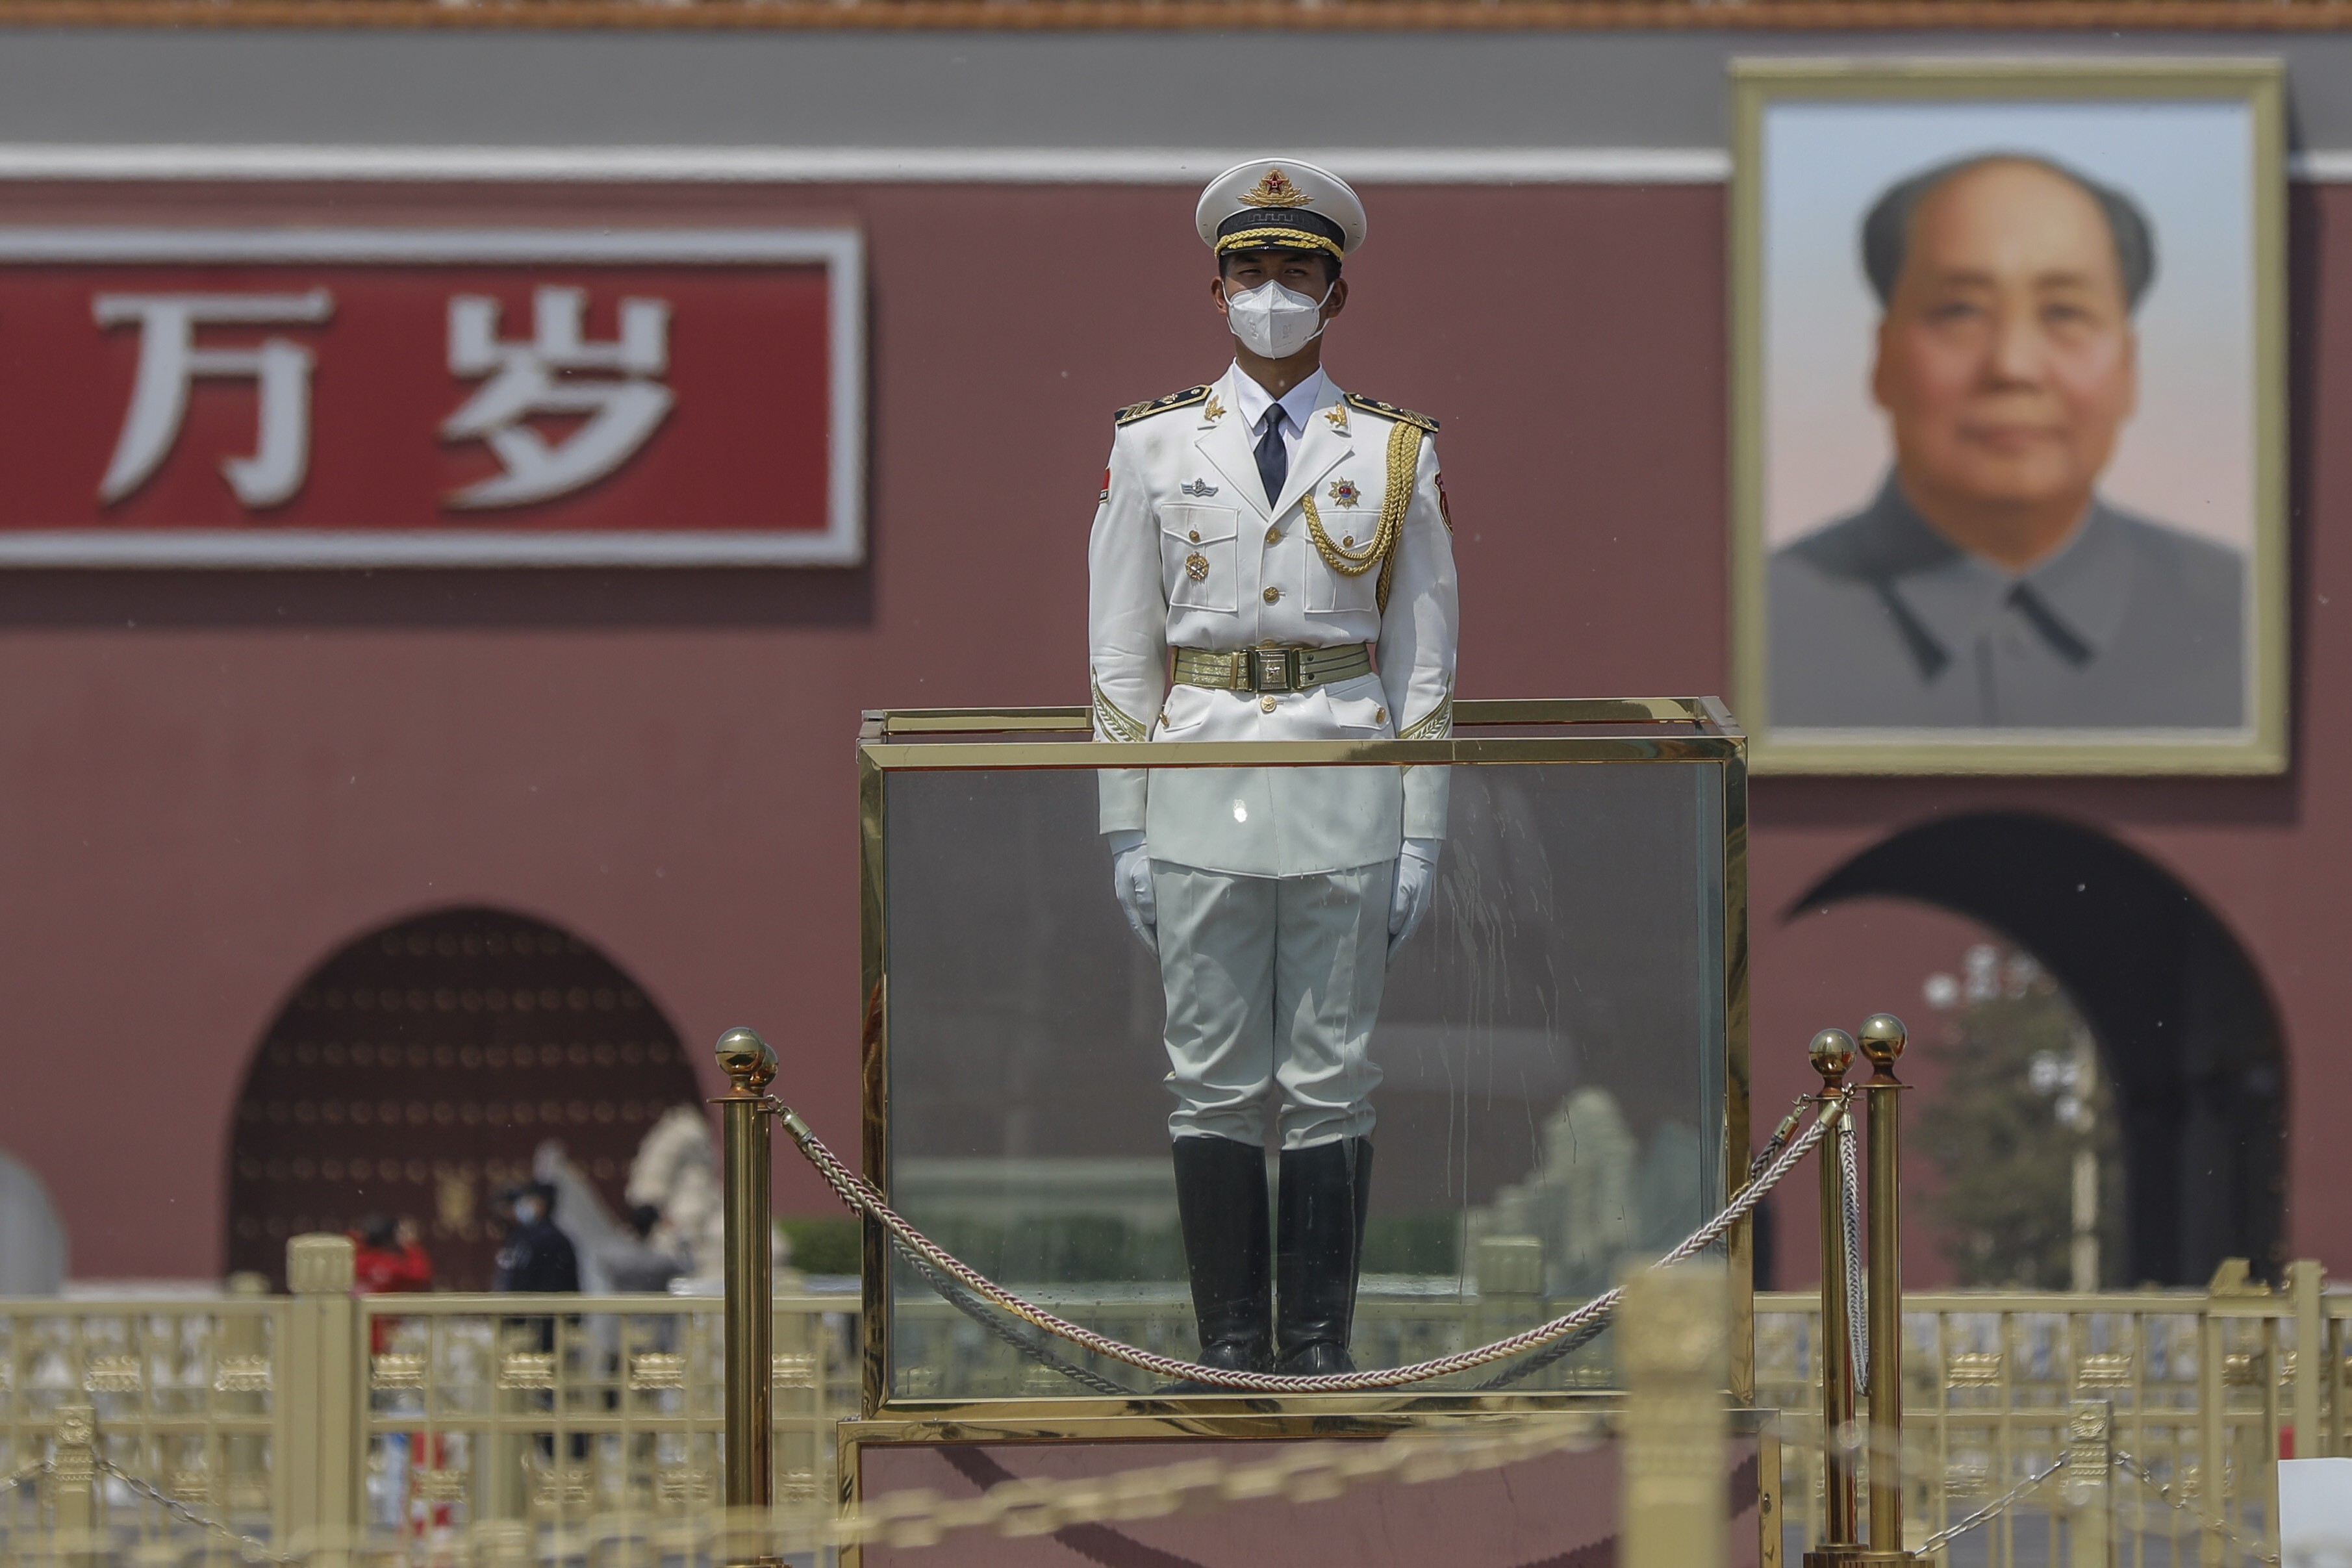 A Chinese paramilitary police officer wearing a face mask stands guard in front of a portrait of former leader Mao Zedong at Tiananmen Square in Beijing, on April 28. Photo: EPA-EFE